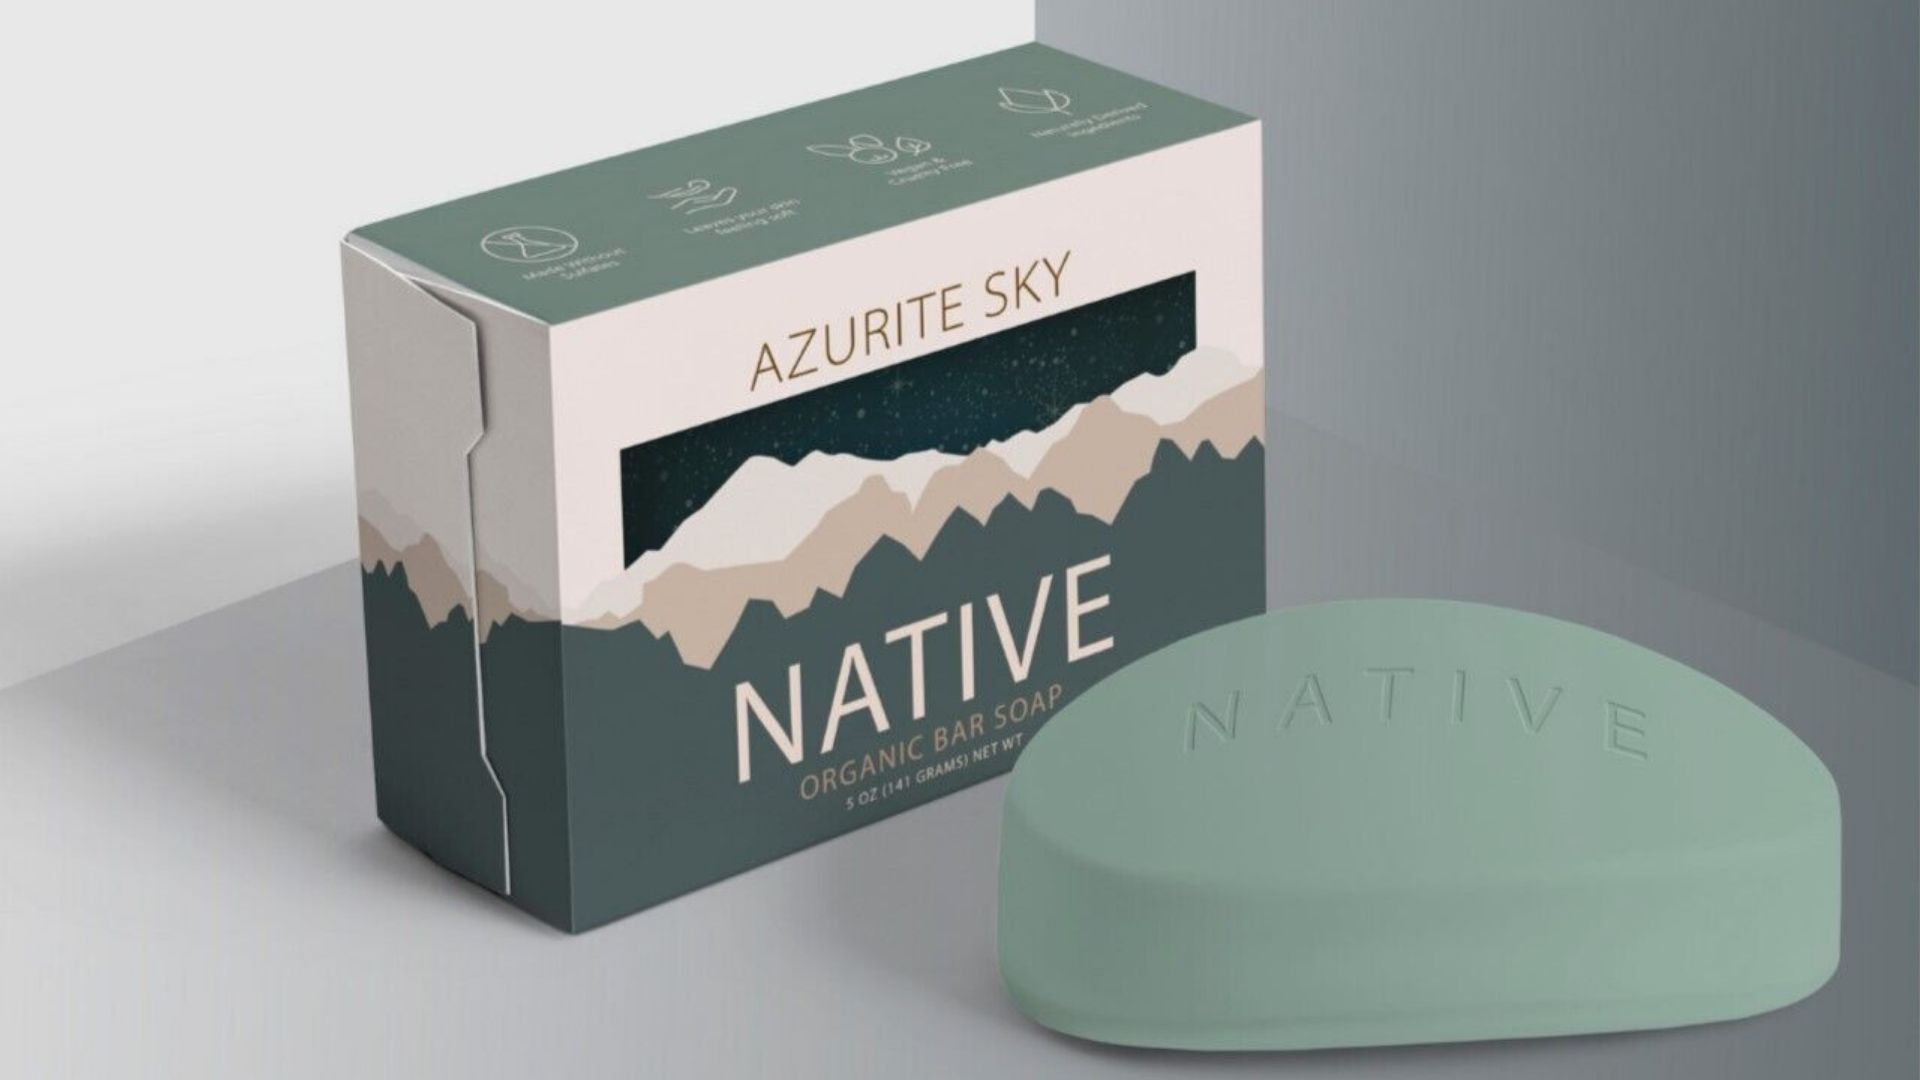 Native soap rebranding / "Native soap rebranding," packaging design, 2 x 3 x 1.125 inches, 2023. This is a re-branded the soap company ‚ "Native" to make it appear more like what they represent. Key words were Natural, Earthy, Healthy, Organic, and Simple. I created 3 different b